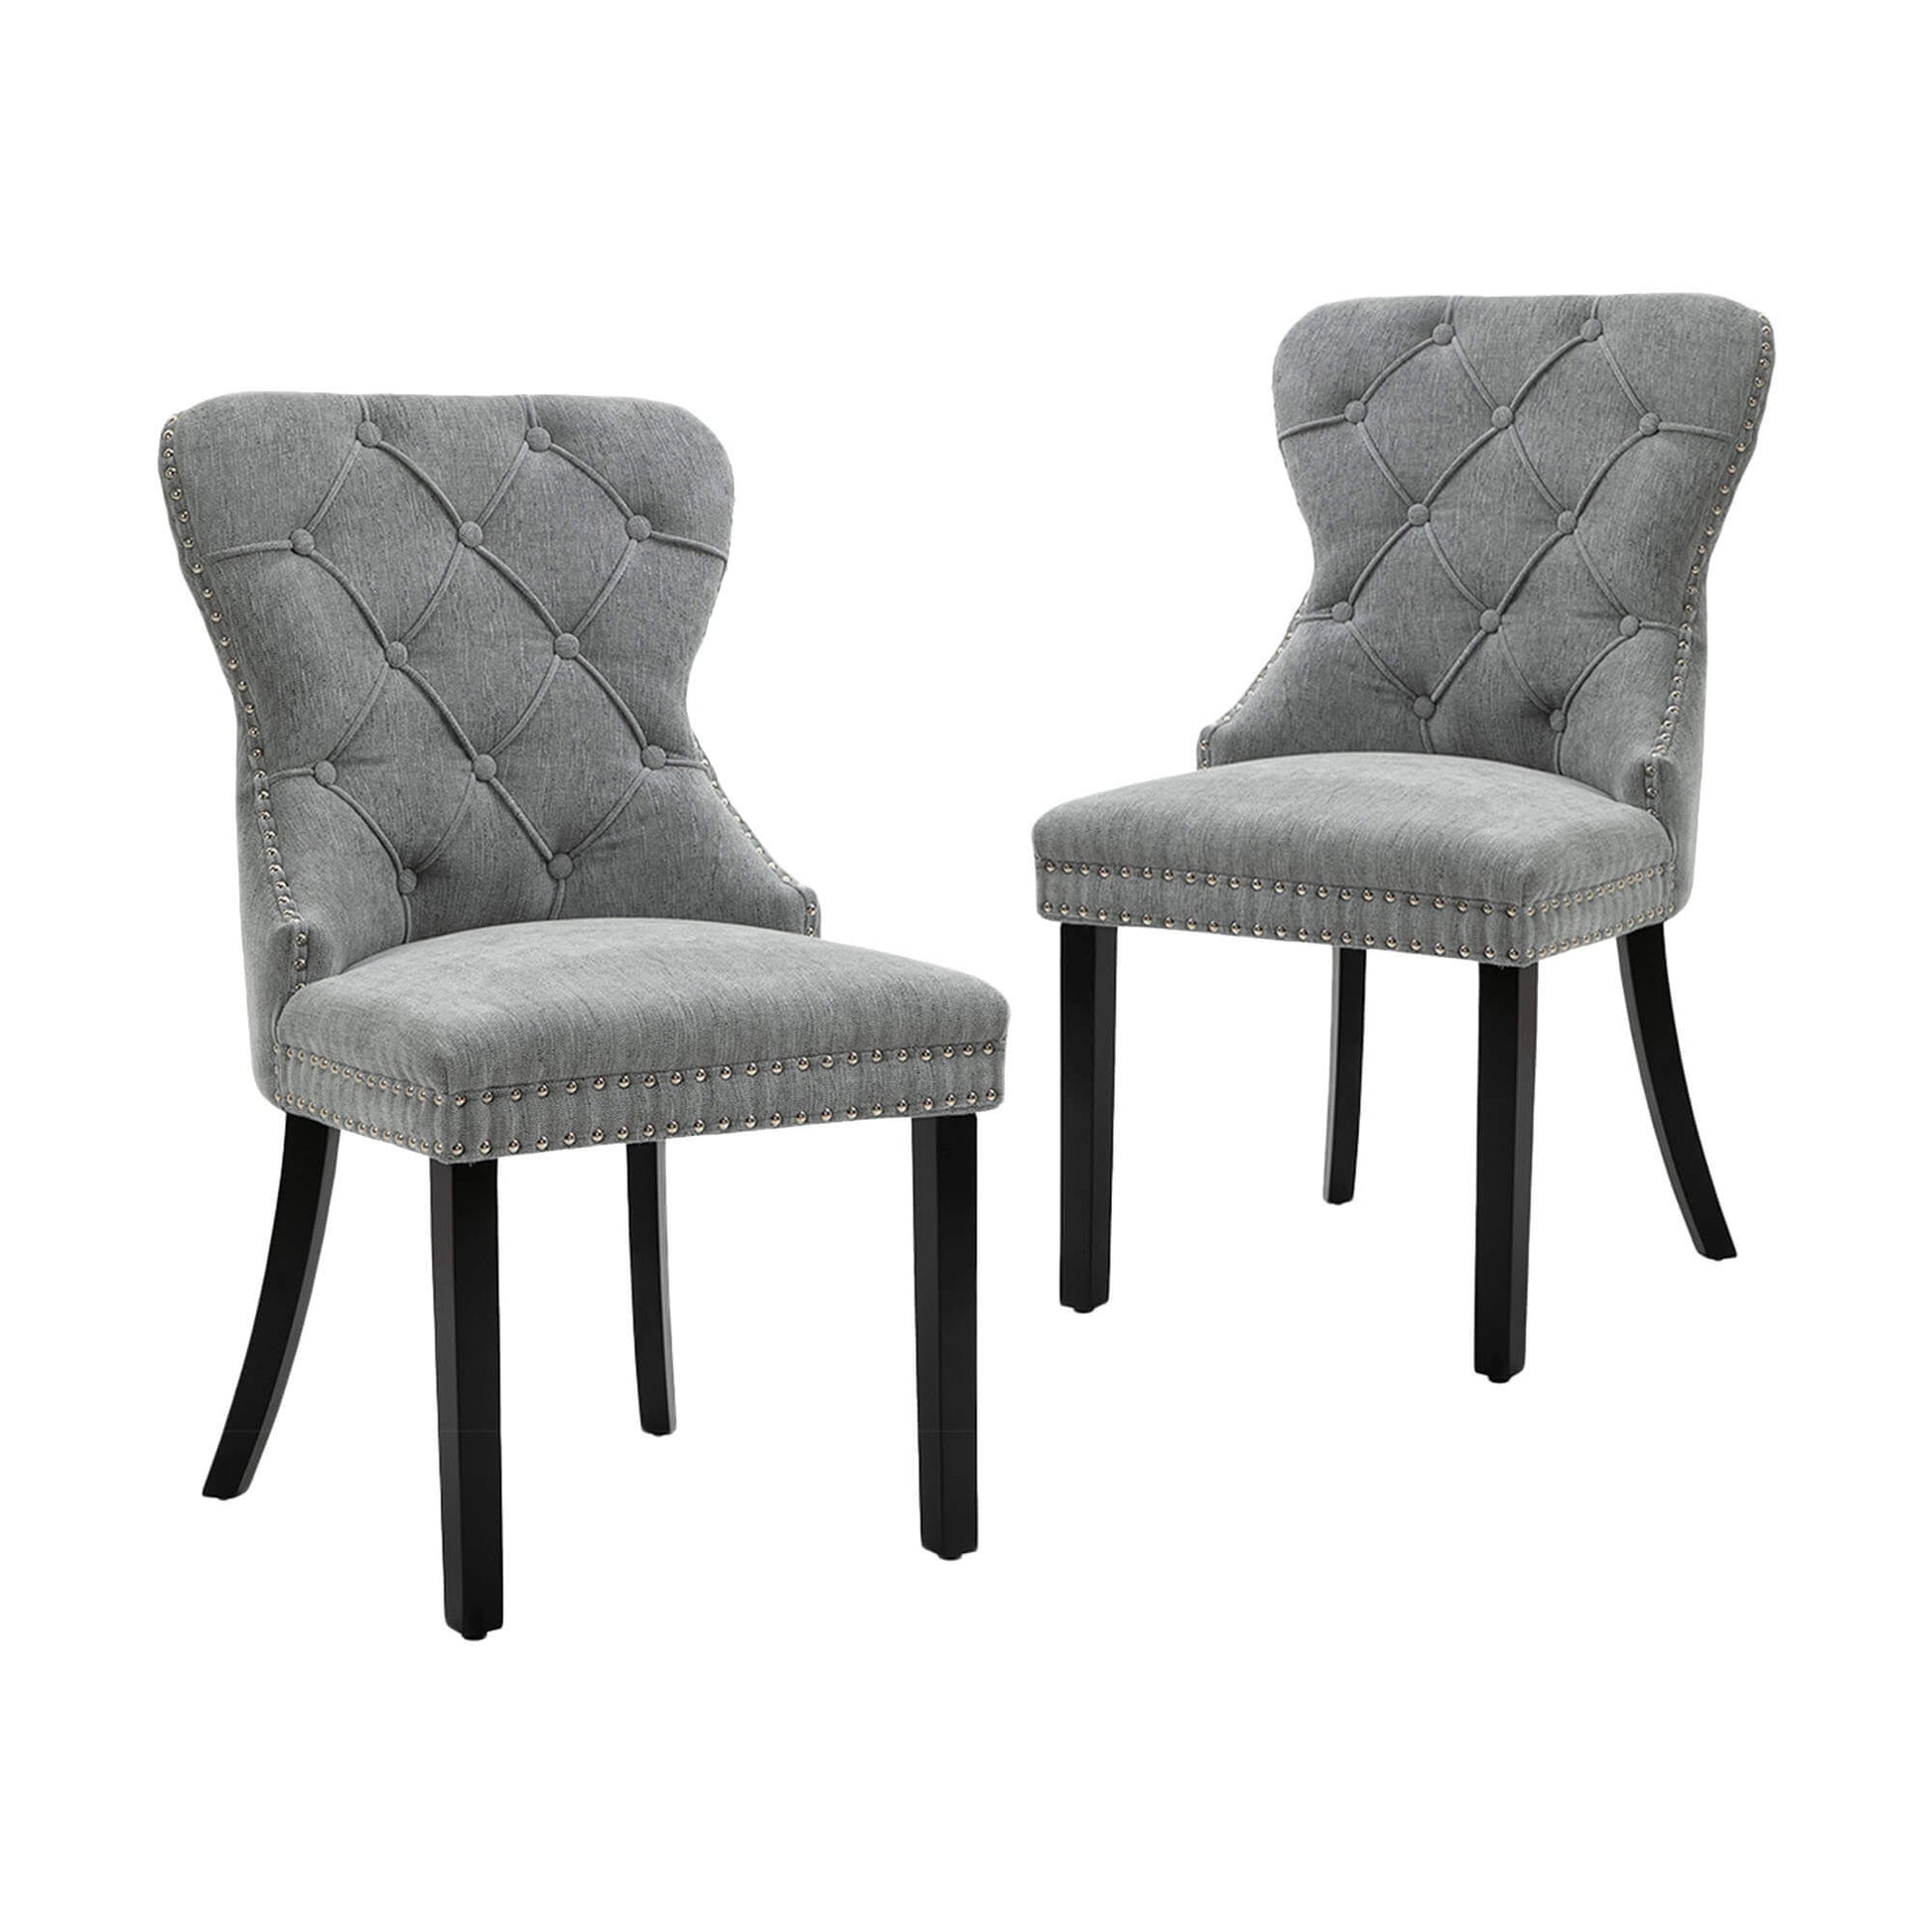 Genoa Version 1 | Fabric French Provincial Wooden Dining Chairs | Set Of 2 | Grey